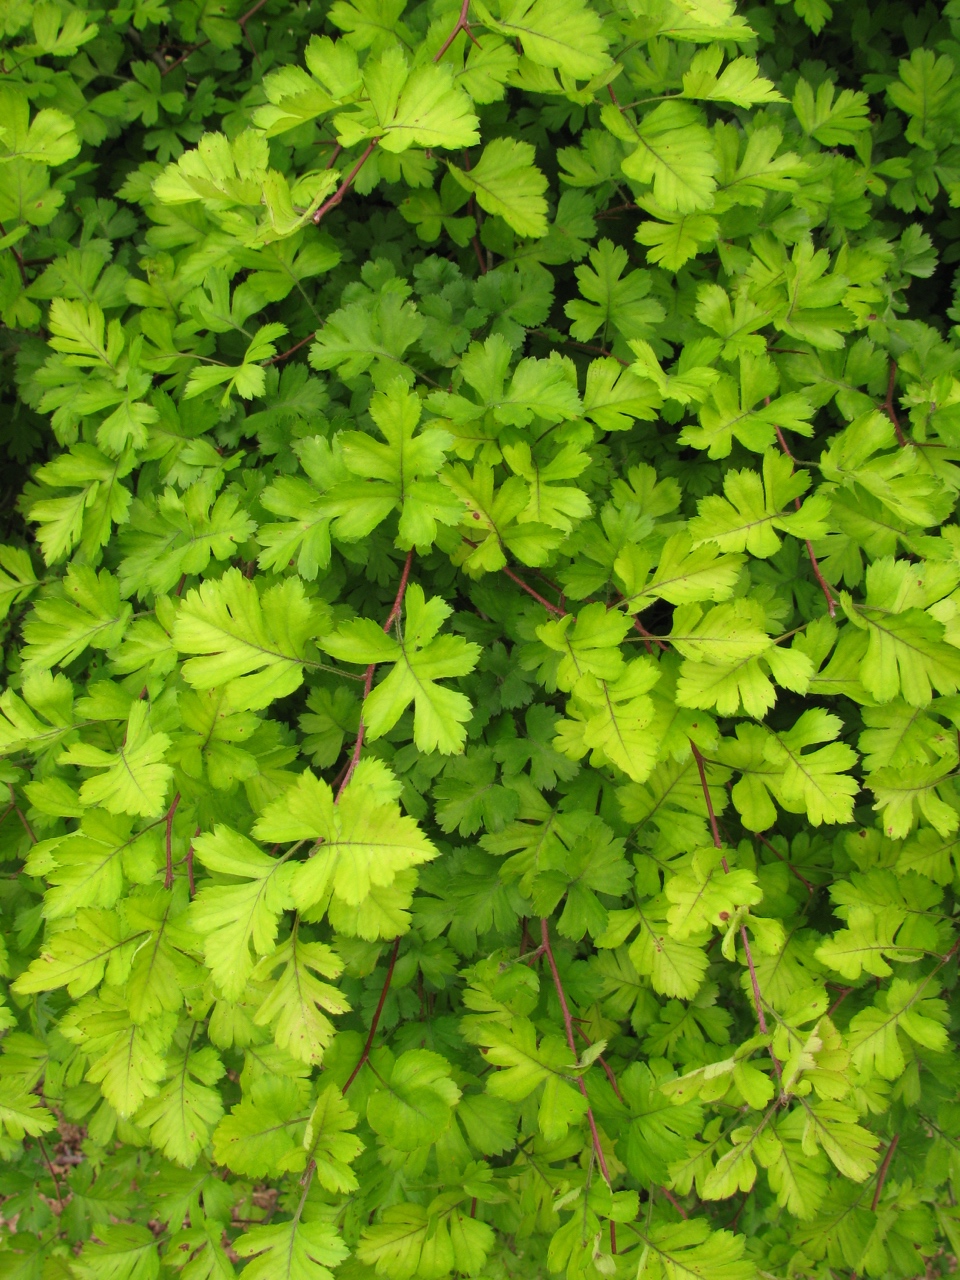 The Scientific Name is Crataegus marshallii. You will likely hear them called Parsley Hawthorn, Parsley Haw. This picture shows the Parsley-shaped leaves of Crataegus marshallii